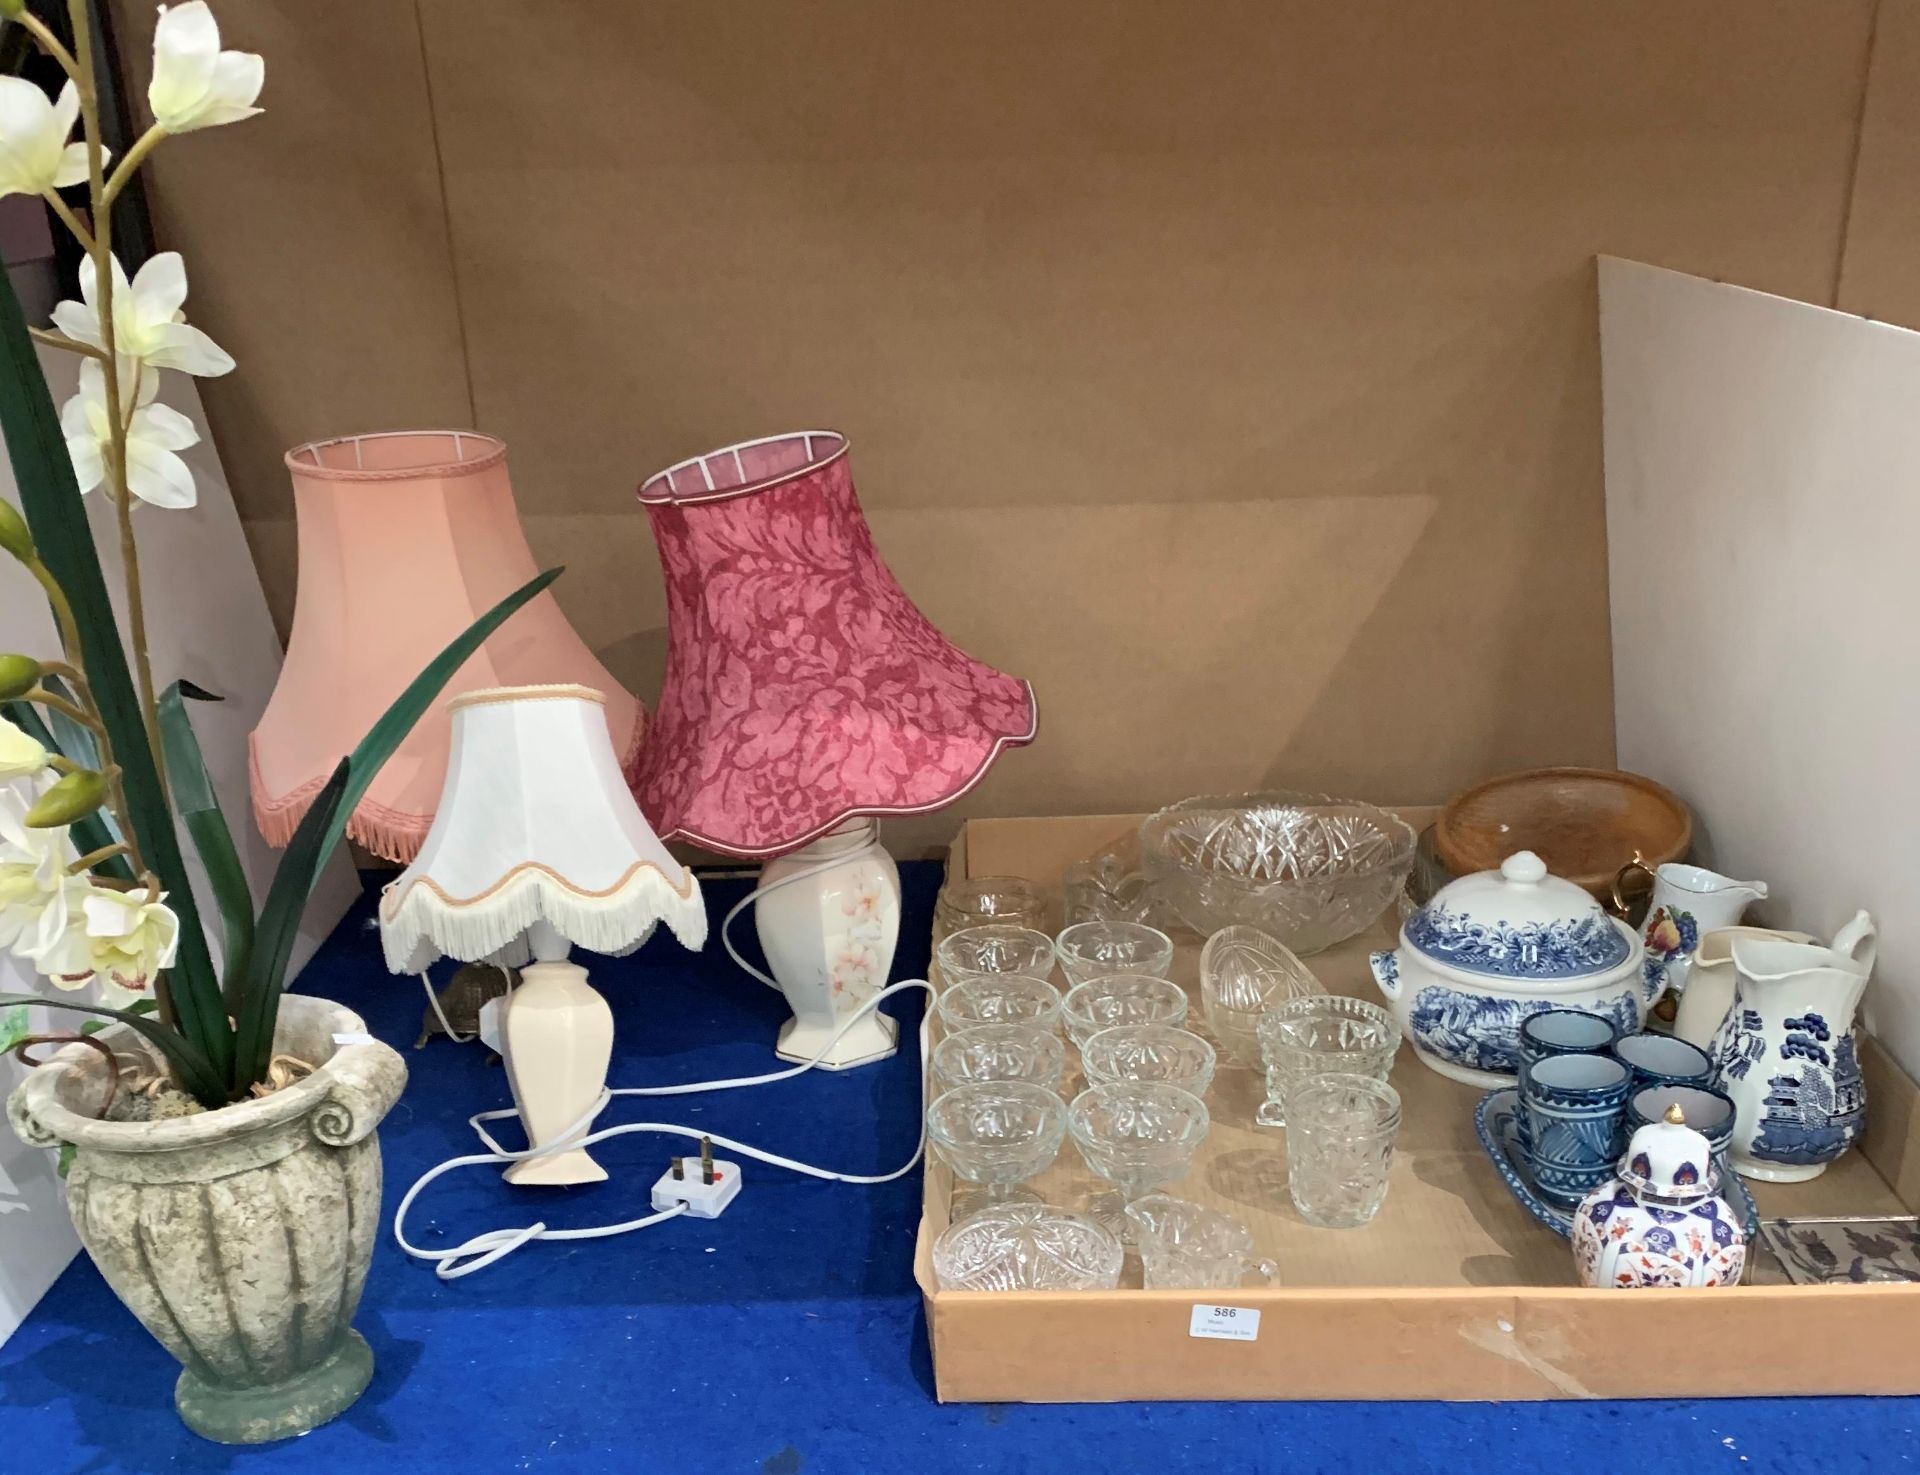 Contents to tray and side of tray - glass sundae dishes, willow pattern jugs, tureen, 3 table lamps,